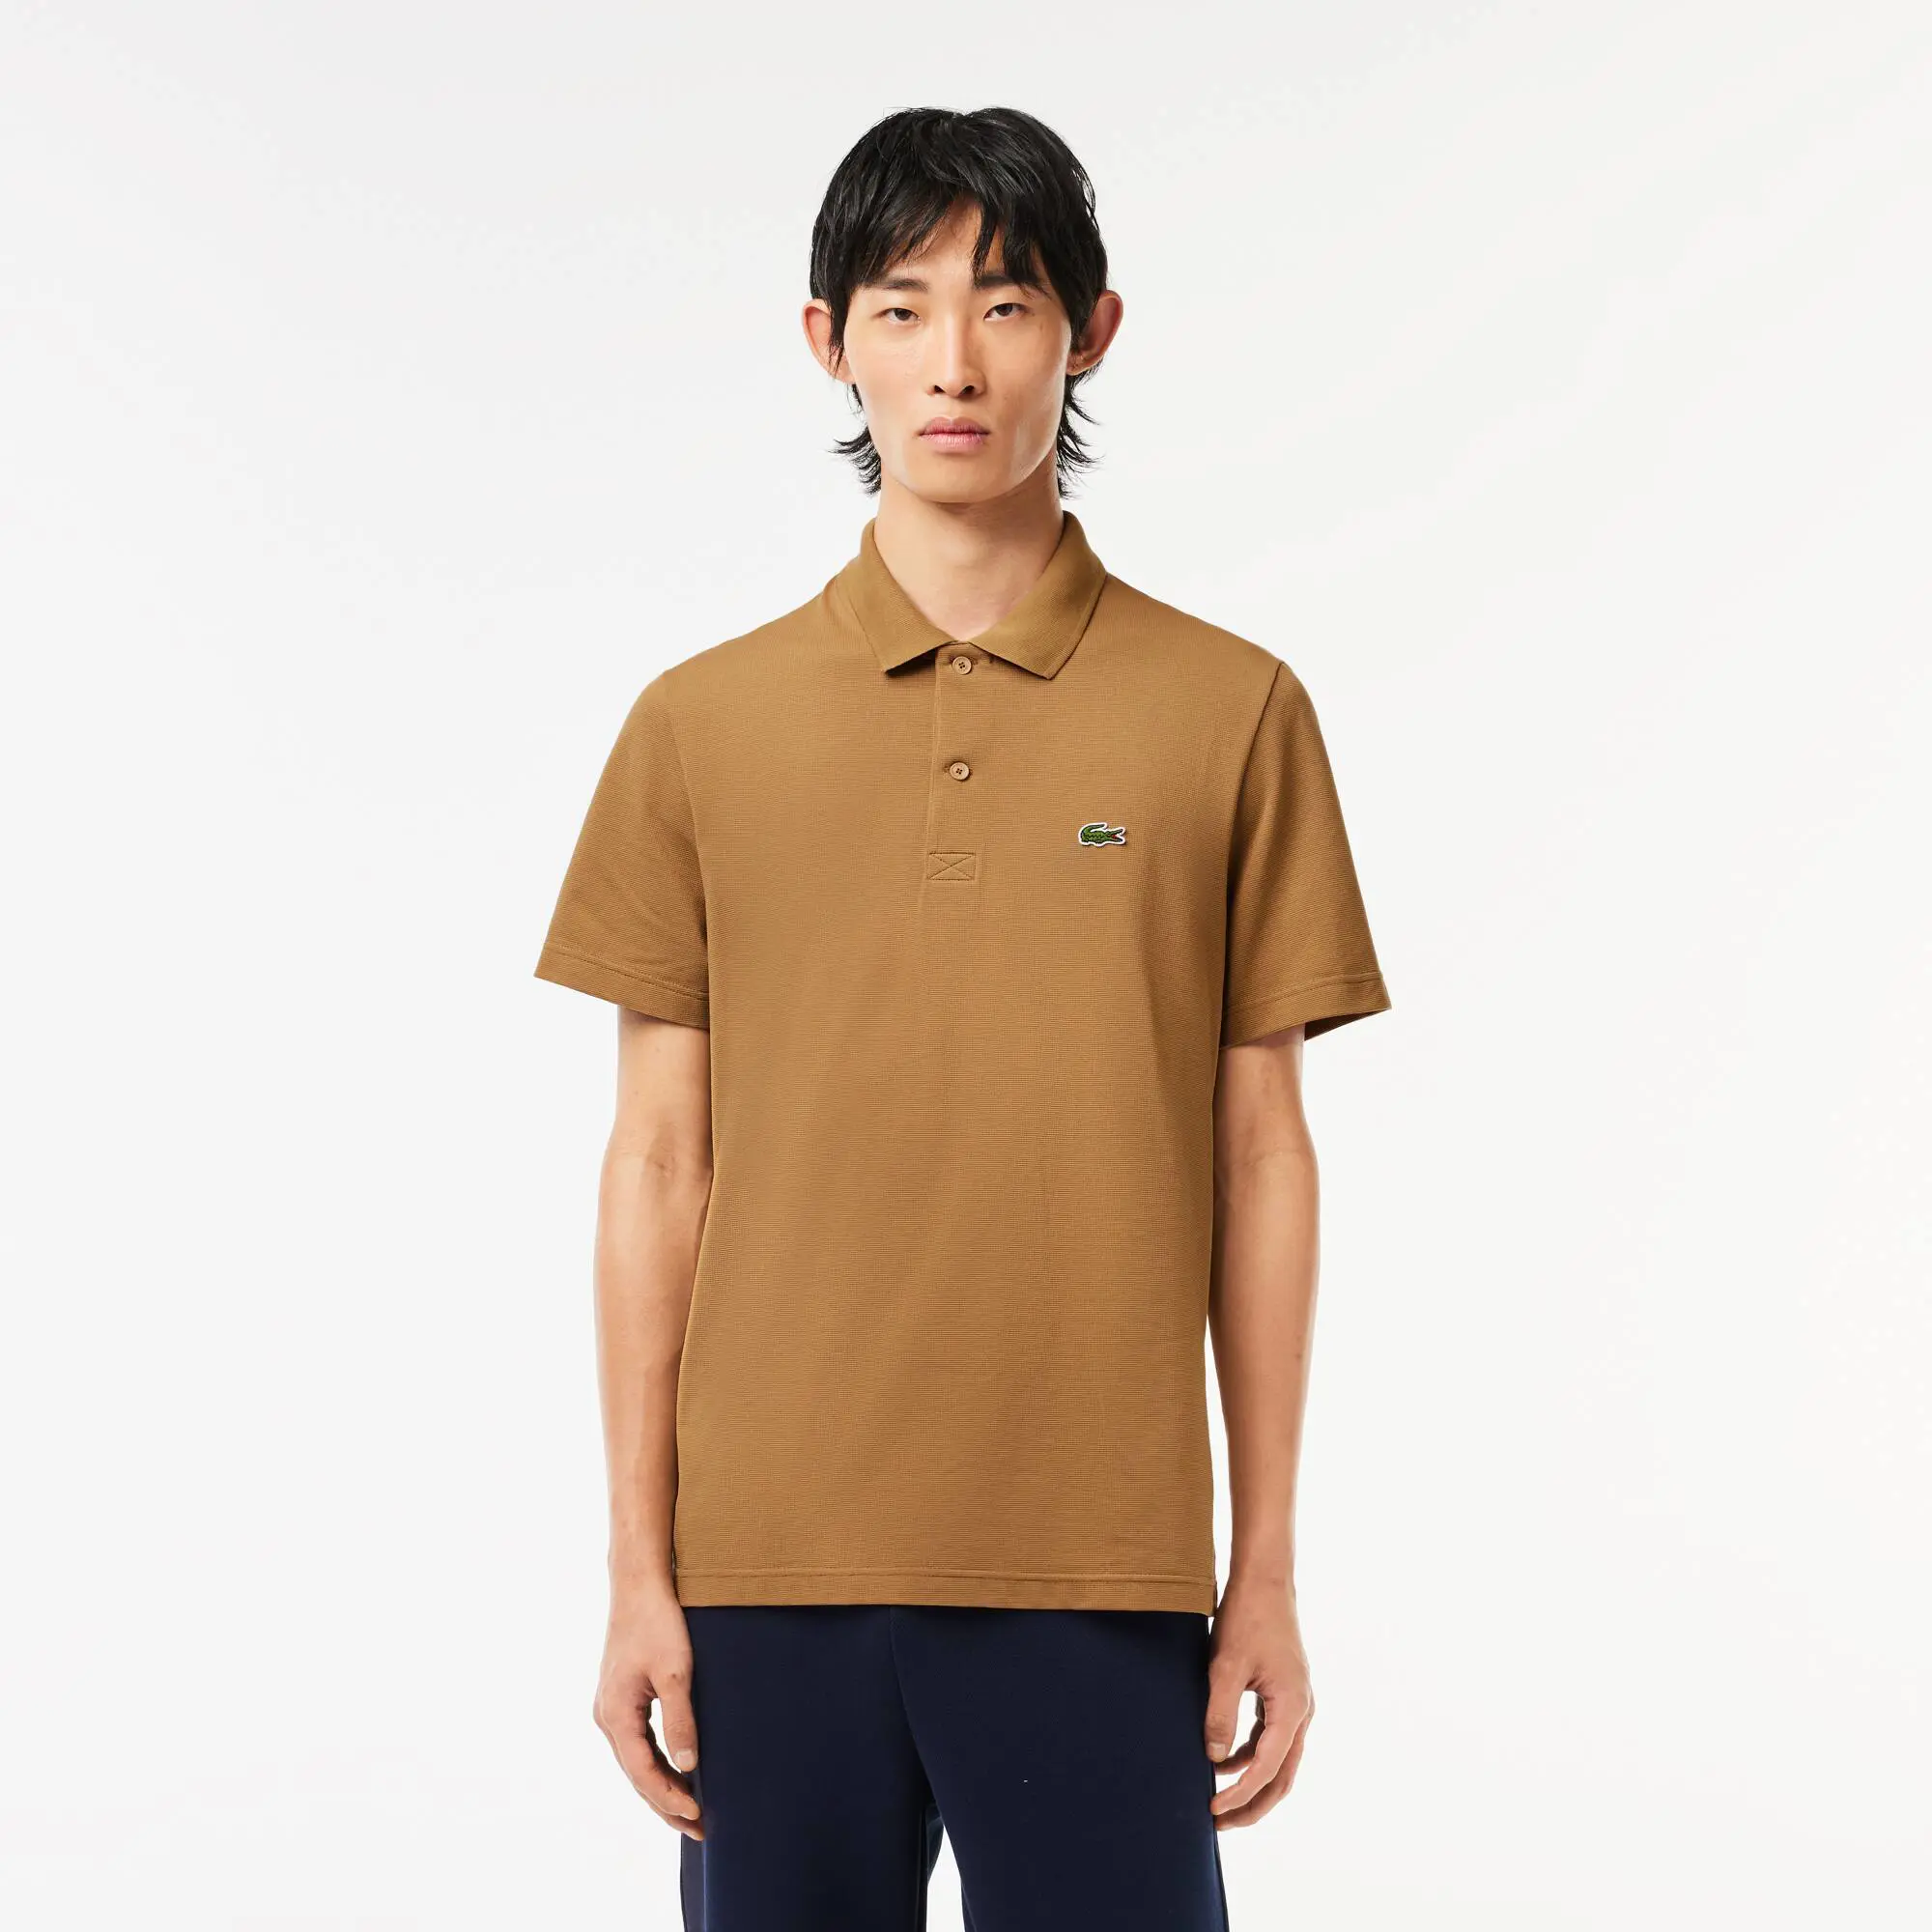 Lacoste Regular Fit Polyester Cotton Polo Shirt. 1